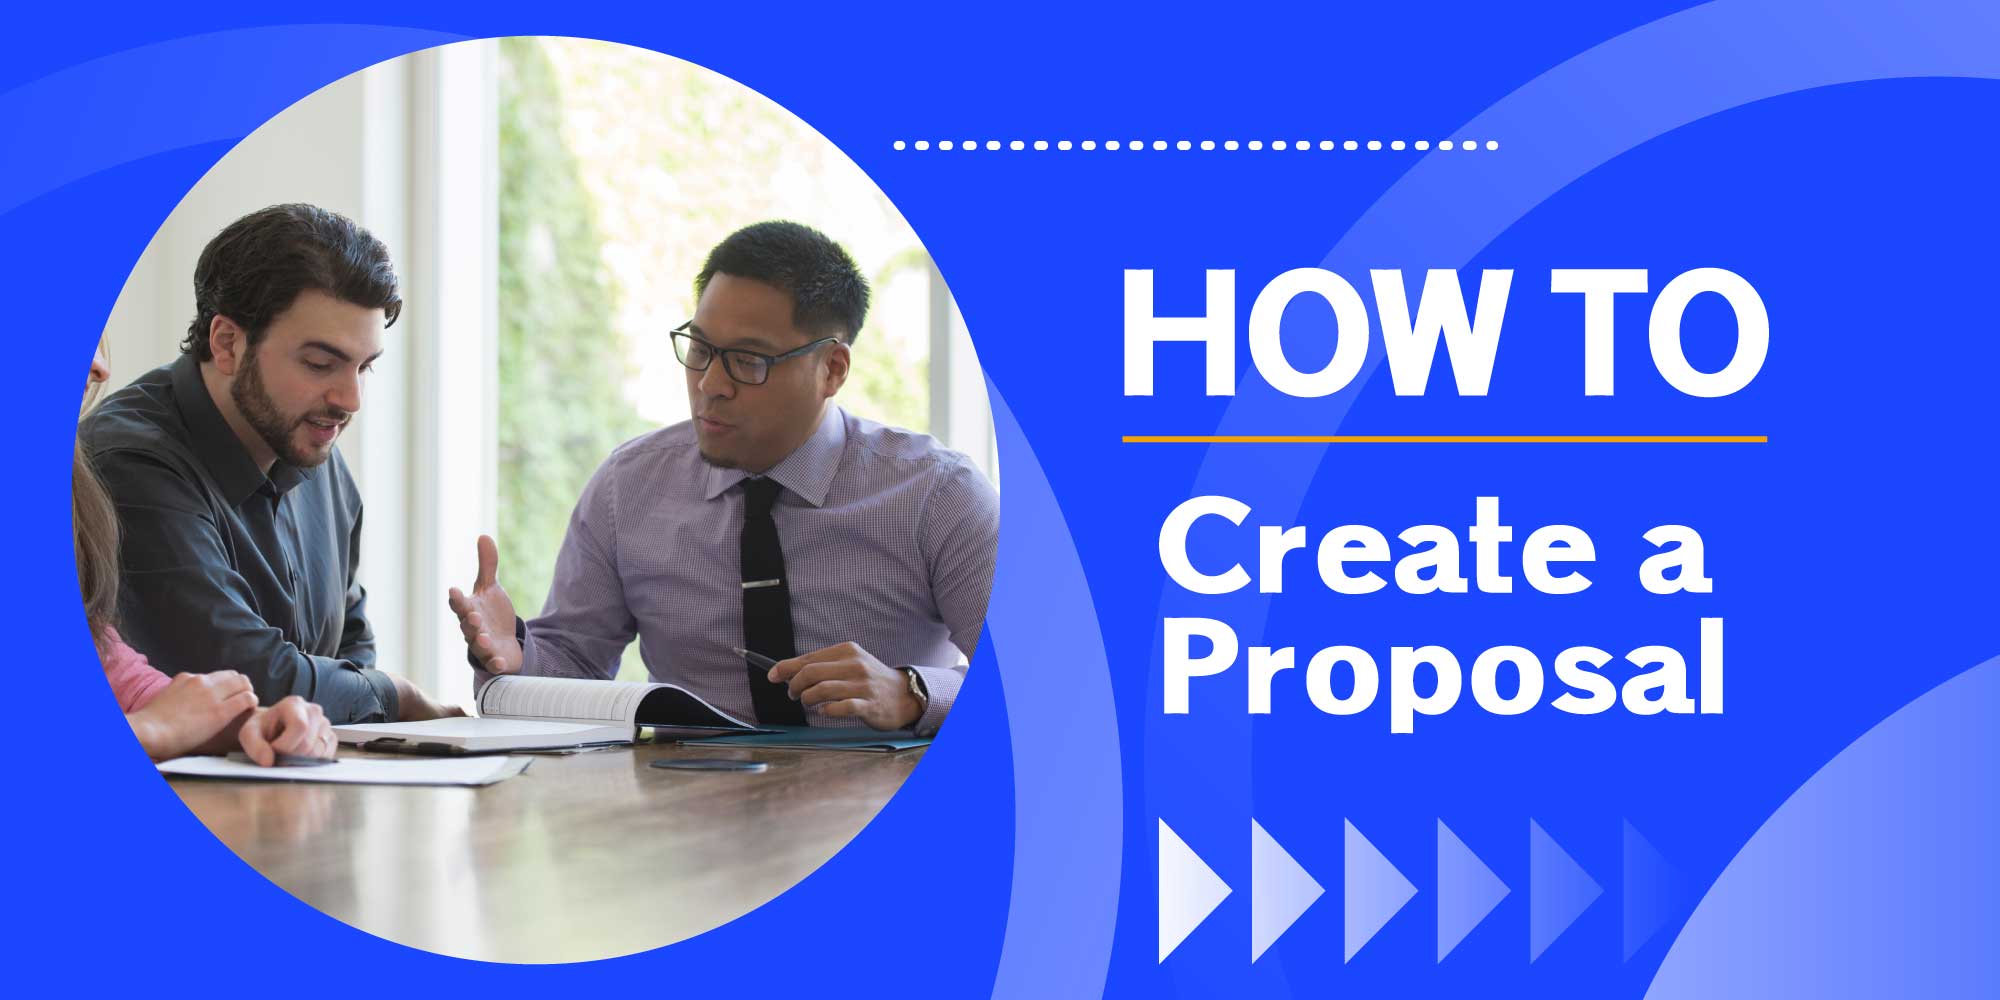 How to Create a Proposal